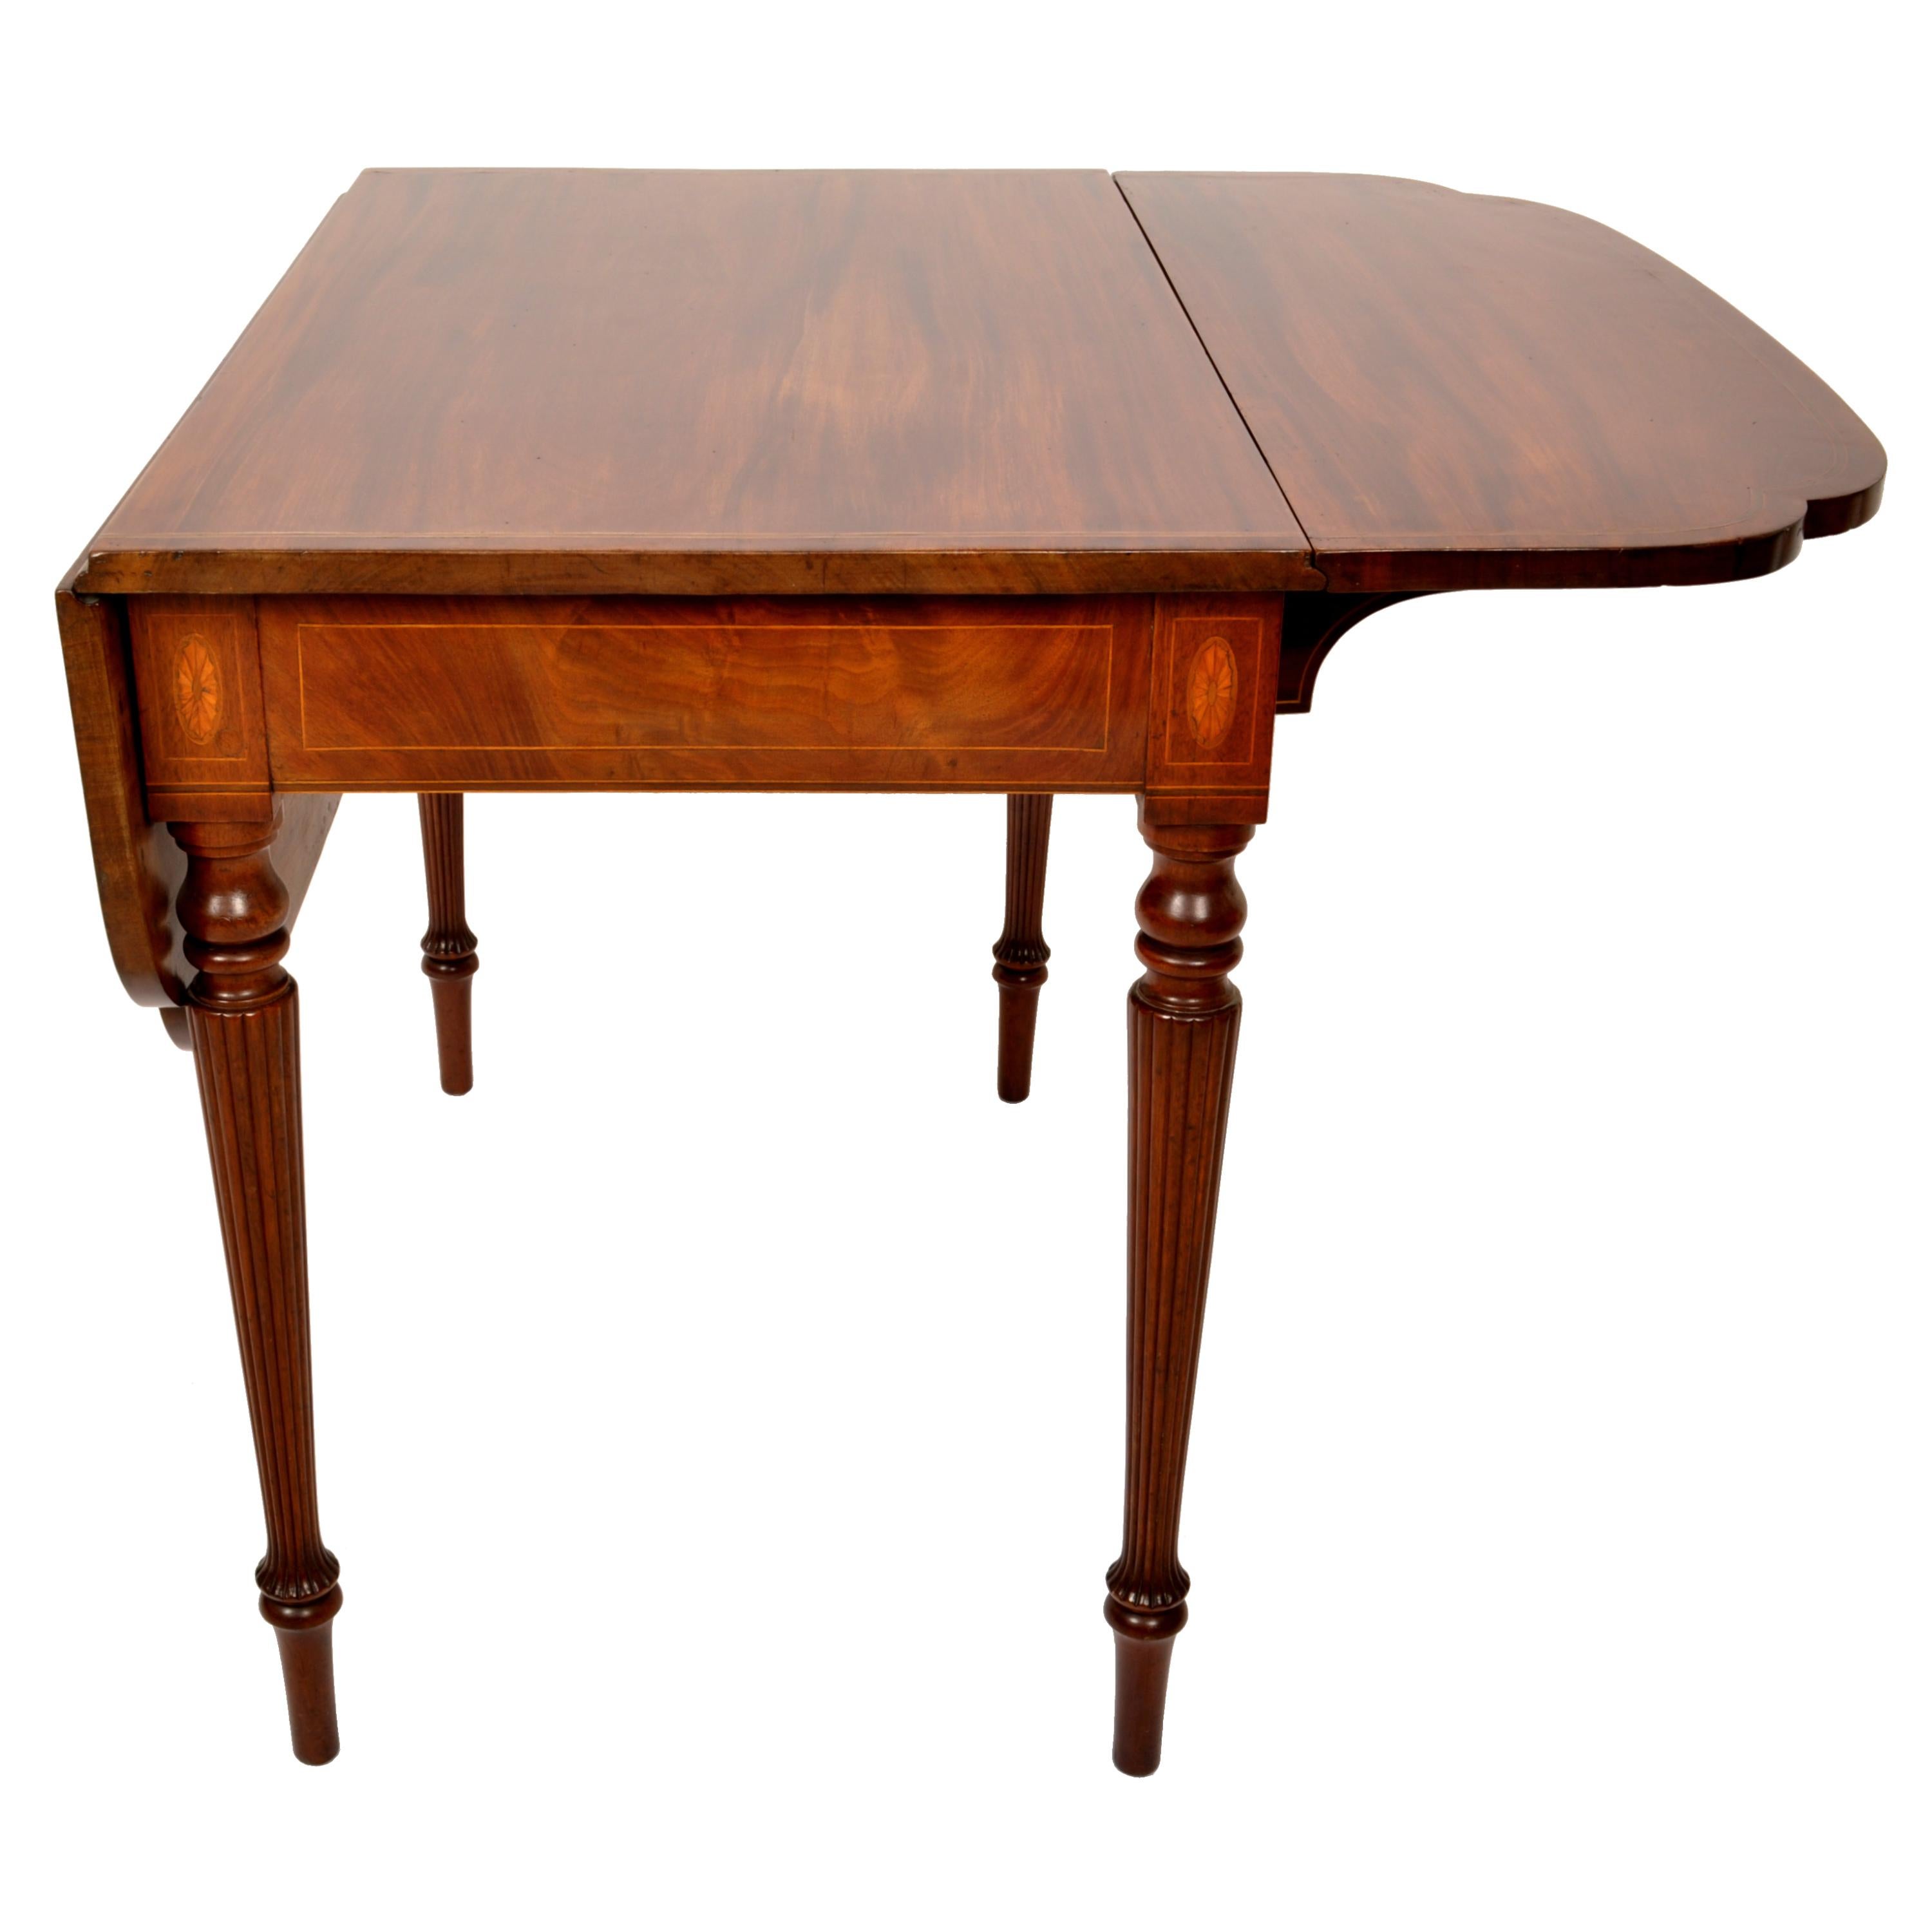 Antique American Federal Sheraton Inlaid Mahogany Pembroke Table New York 1790 For Sale 1